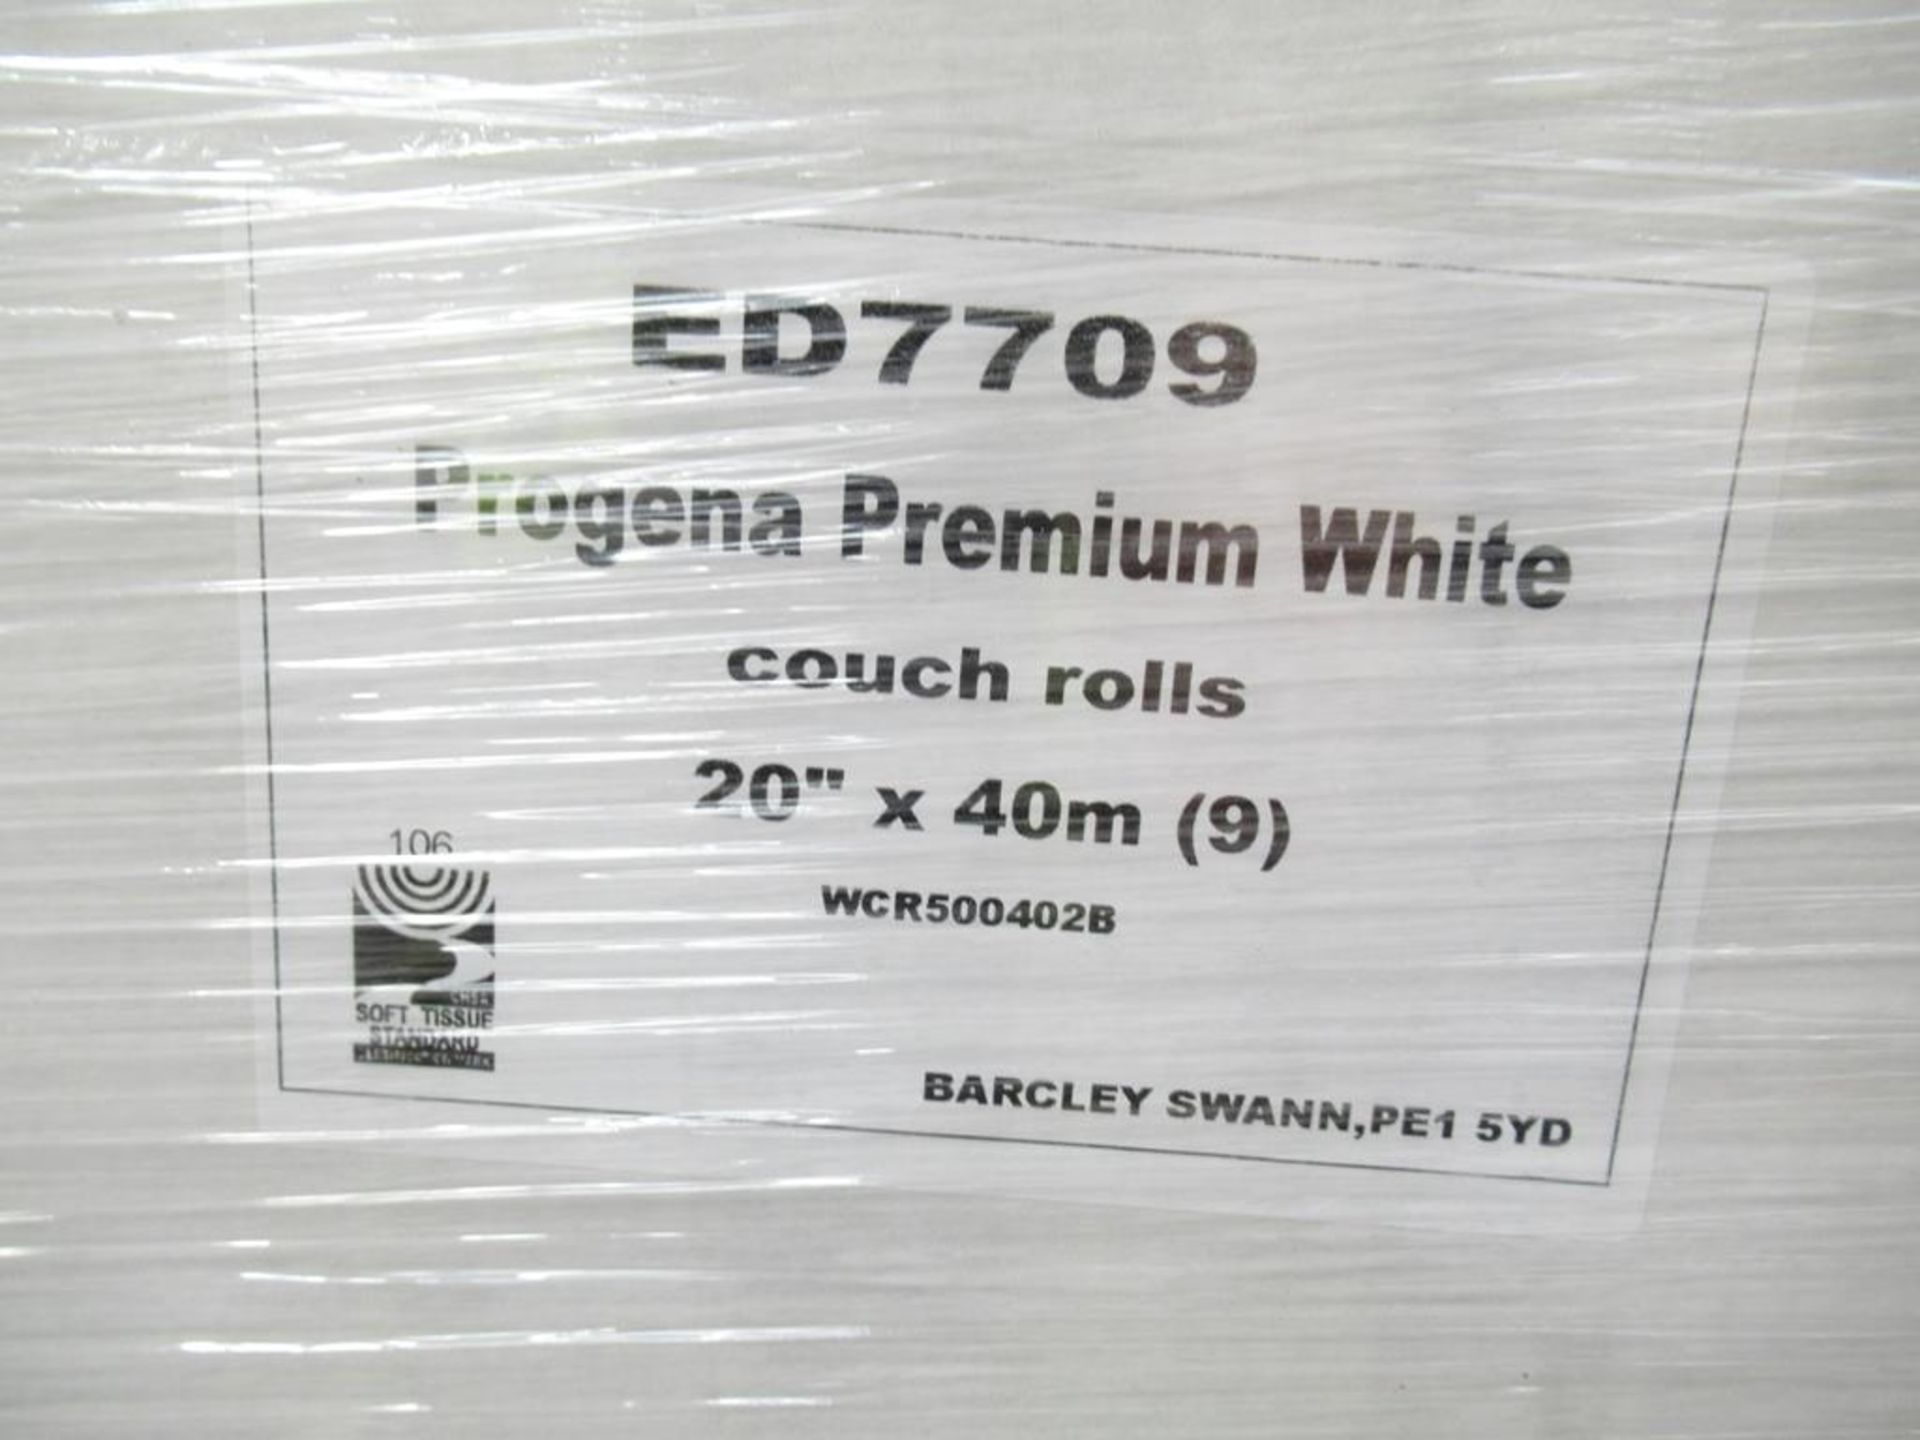 Pallet to contain 36 boxes of Progena Premium White Couch Rolls (20" x 40m per roll, 9 rolls per box - Image 2 of 2